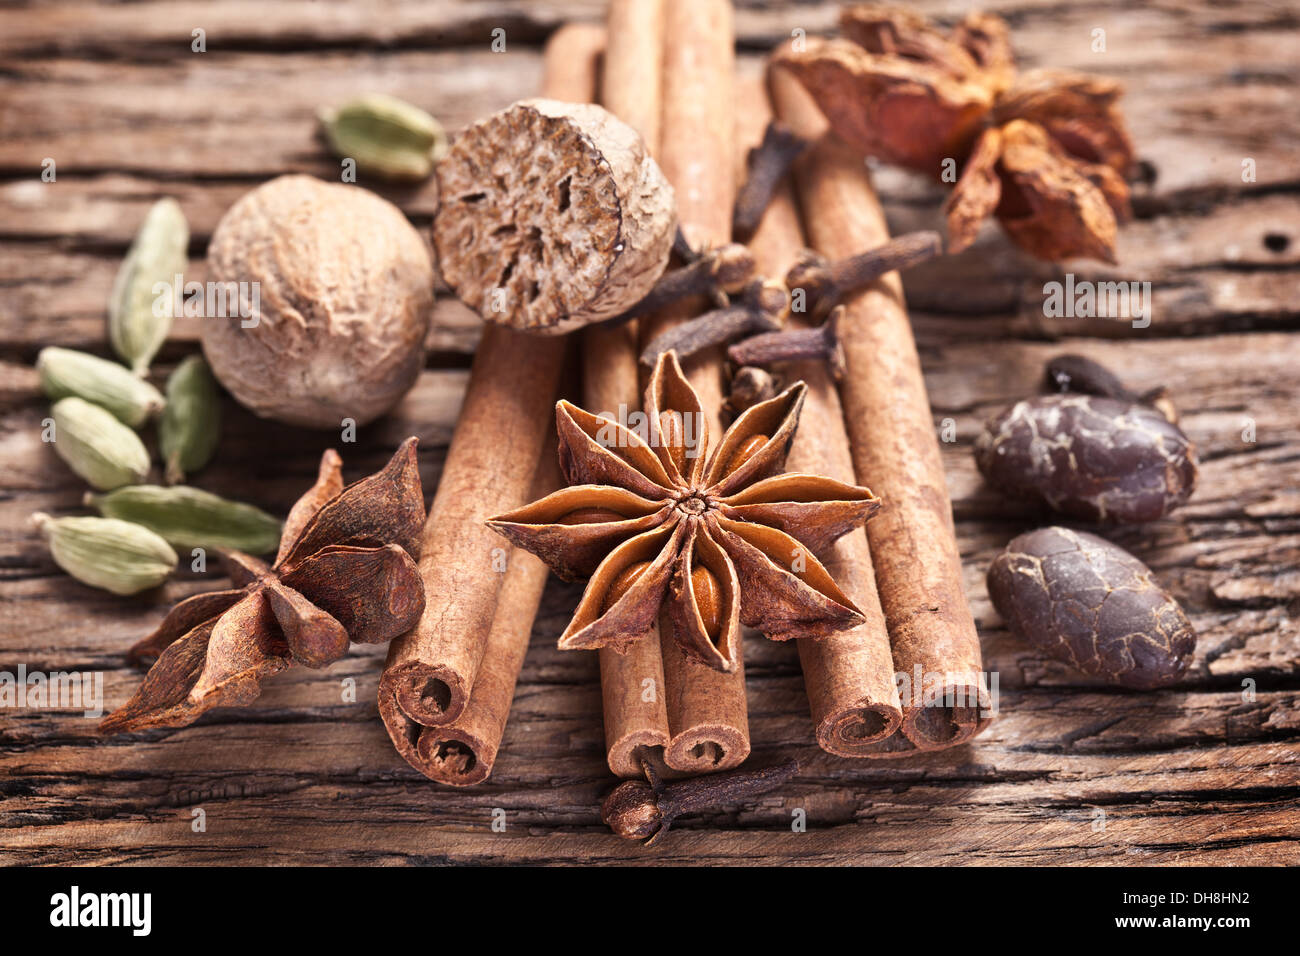 Spices on a old wooden table. Stock Photo